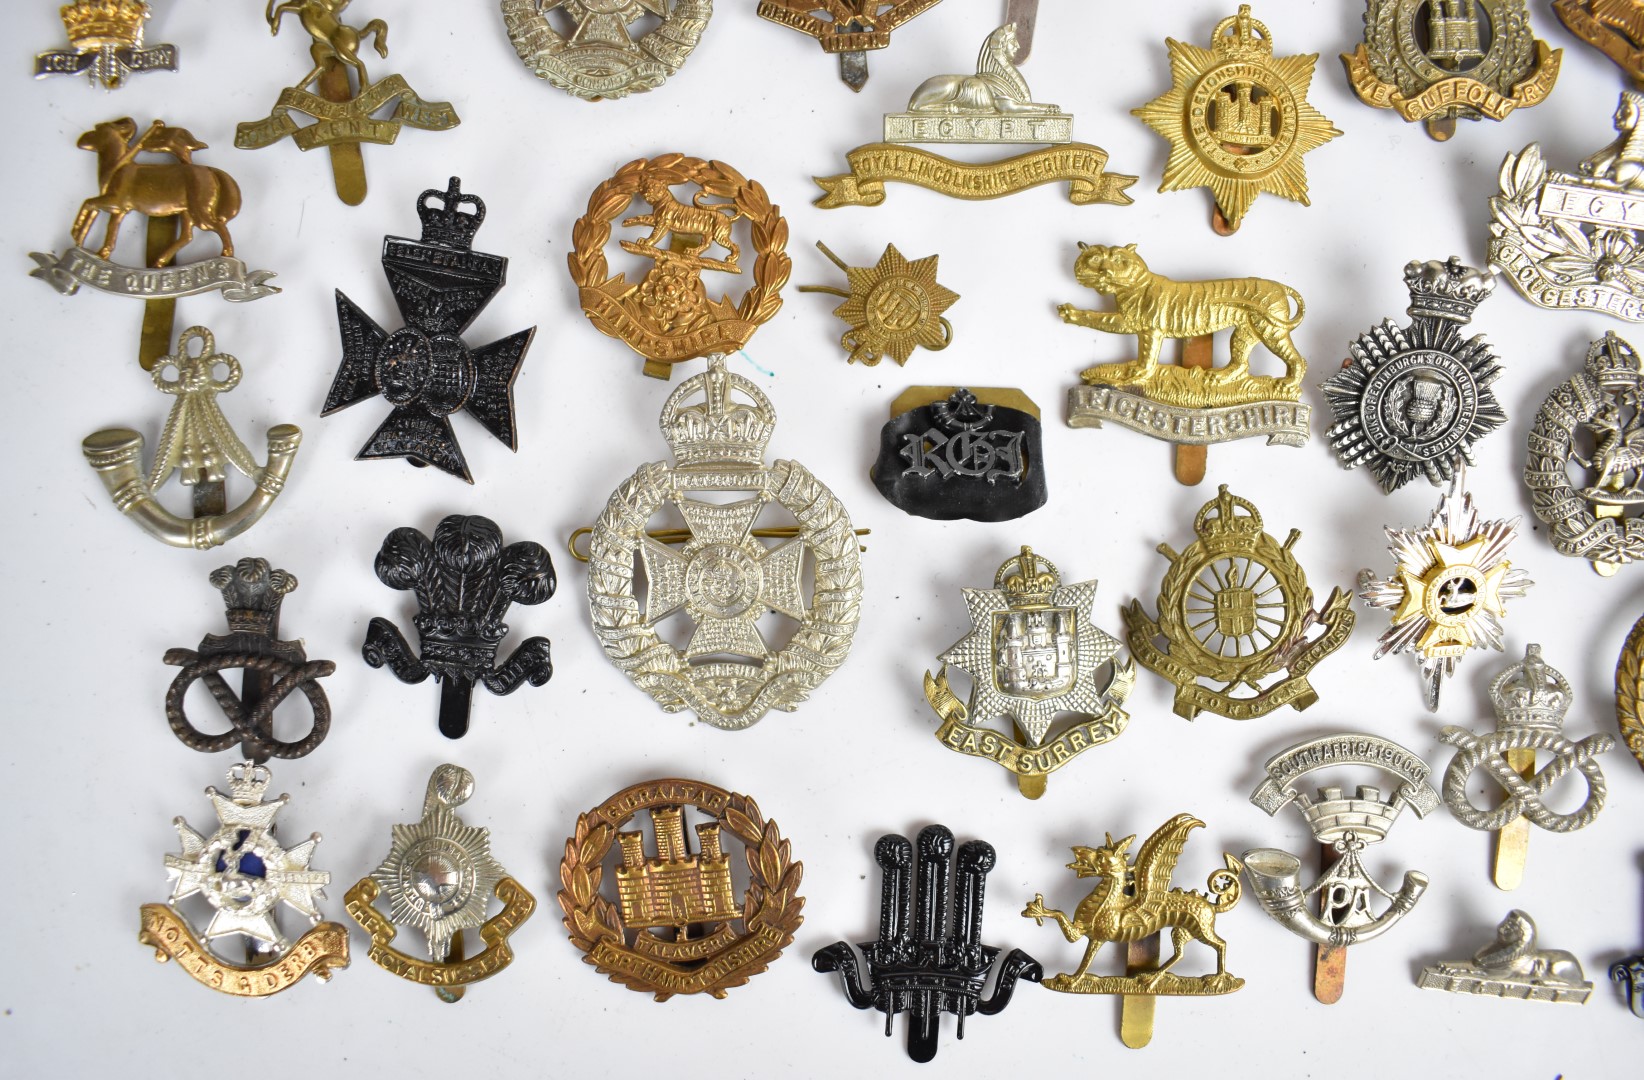 Large collection of approximately 100 British Army cap badges including Royal Sussex Regiment, - Image 2 of 14